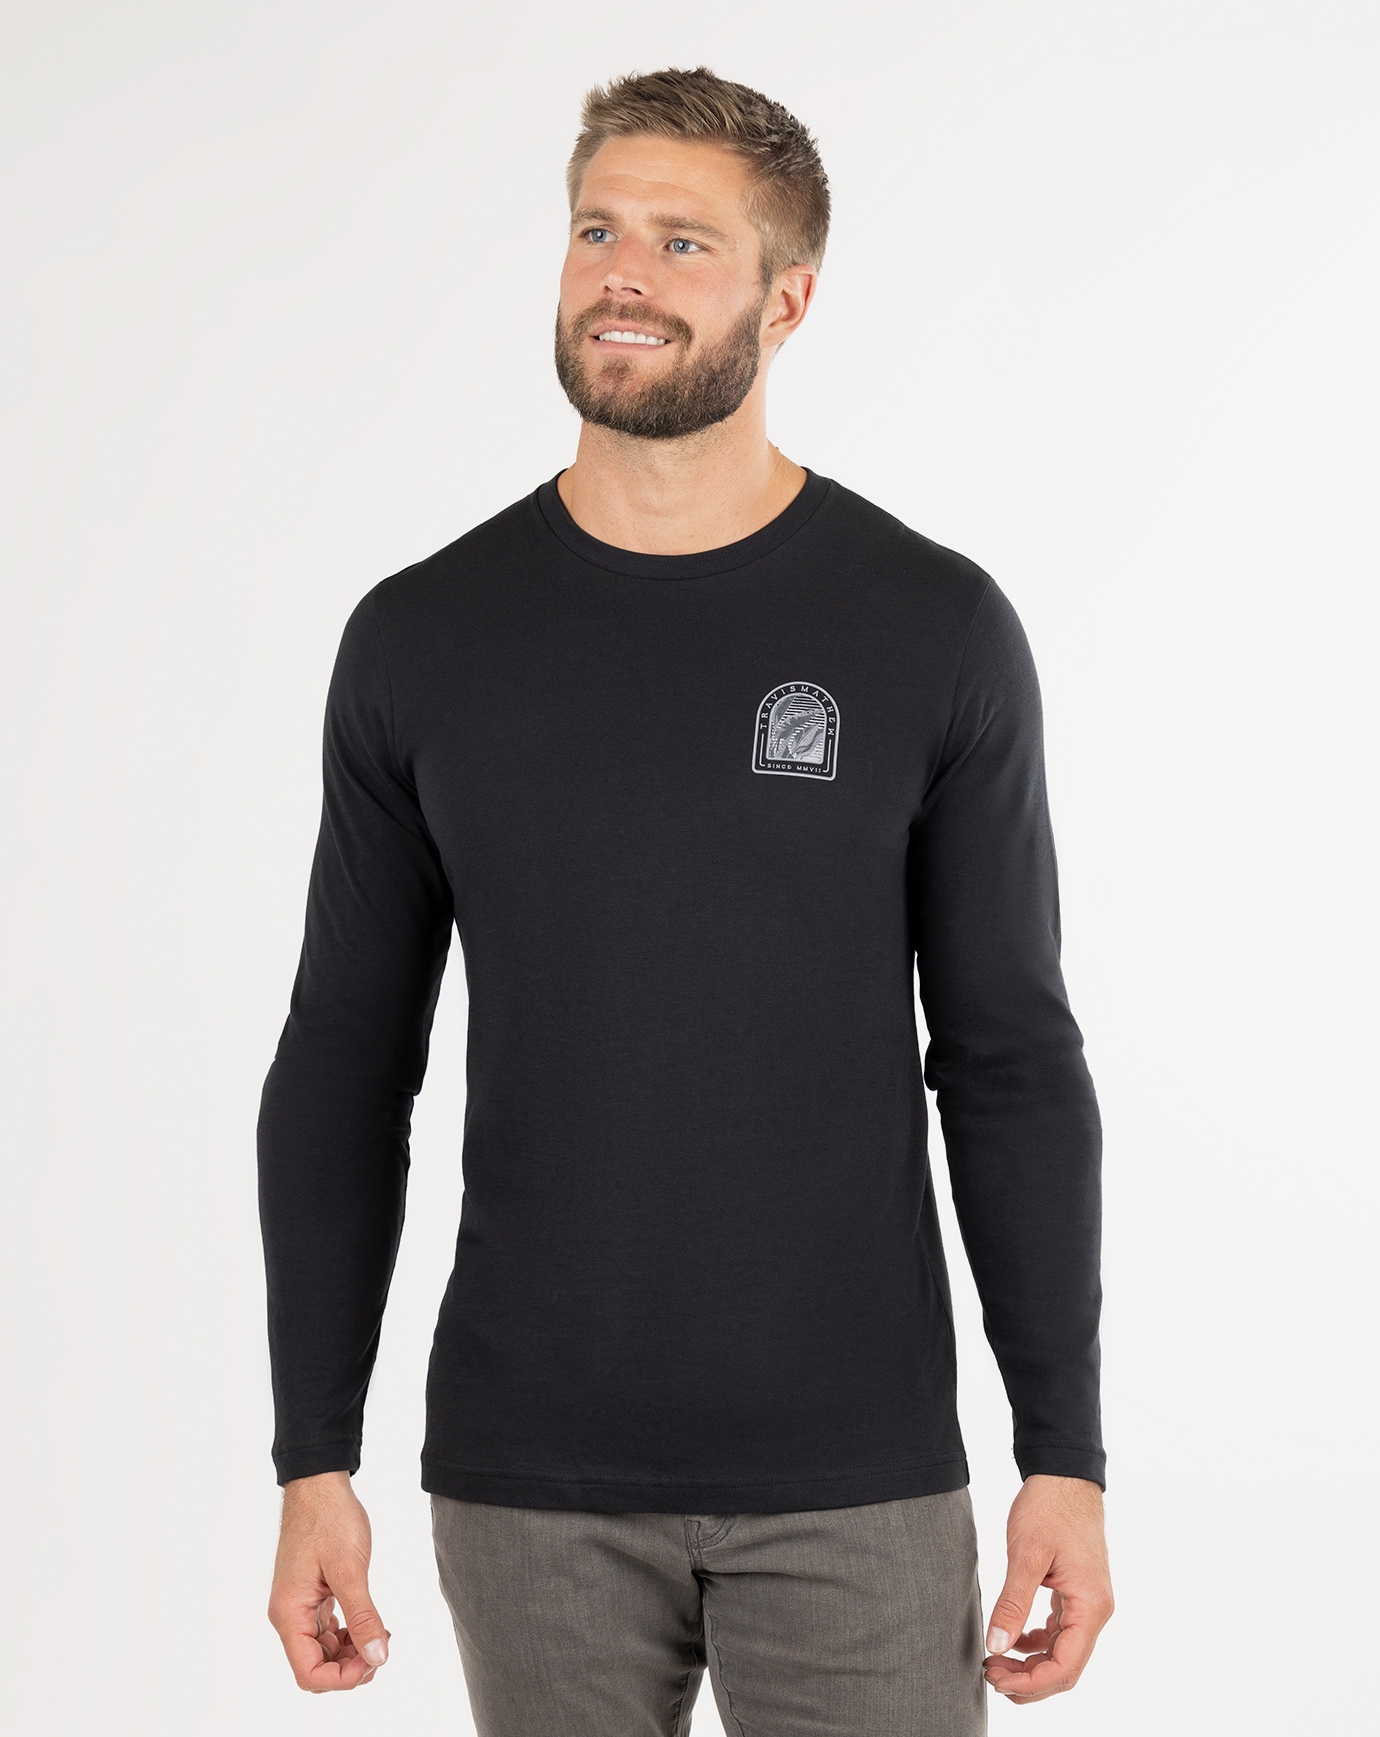 Related Product - LEARN THE ROPES LONG SLEEVE TEE